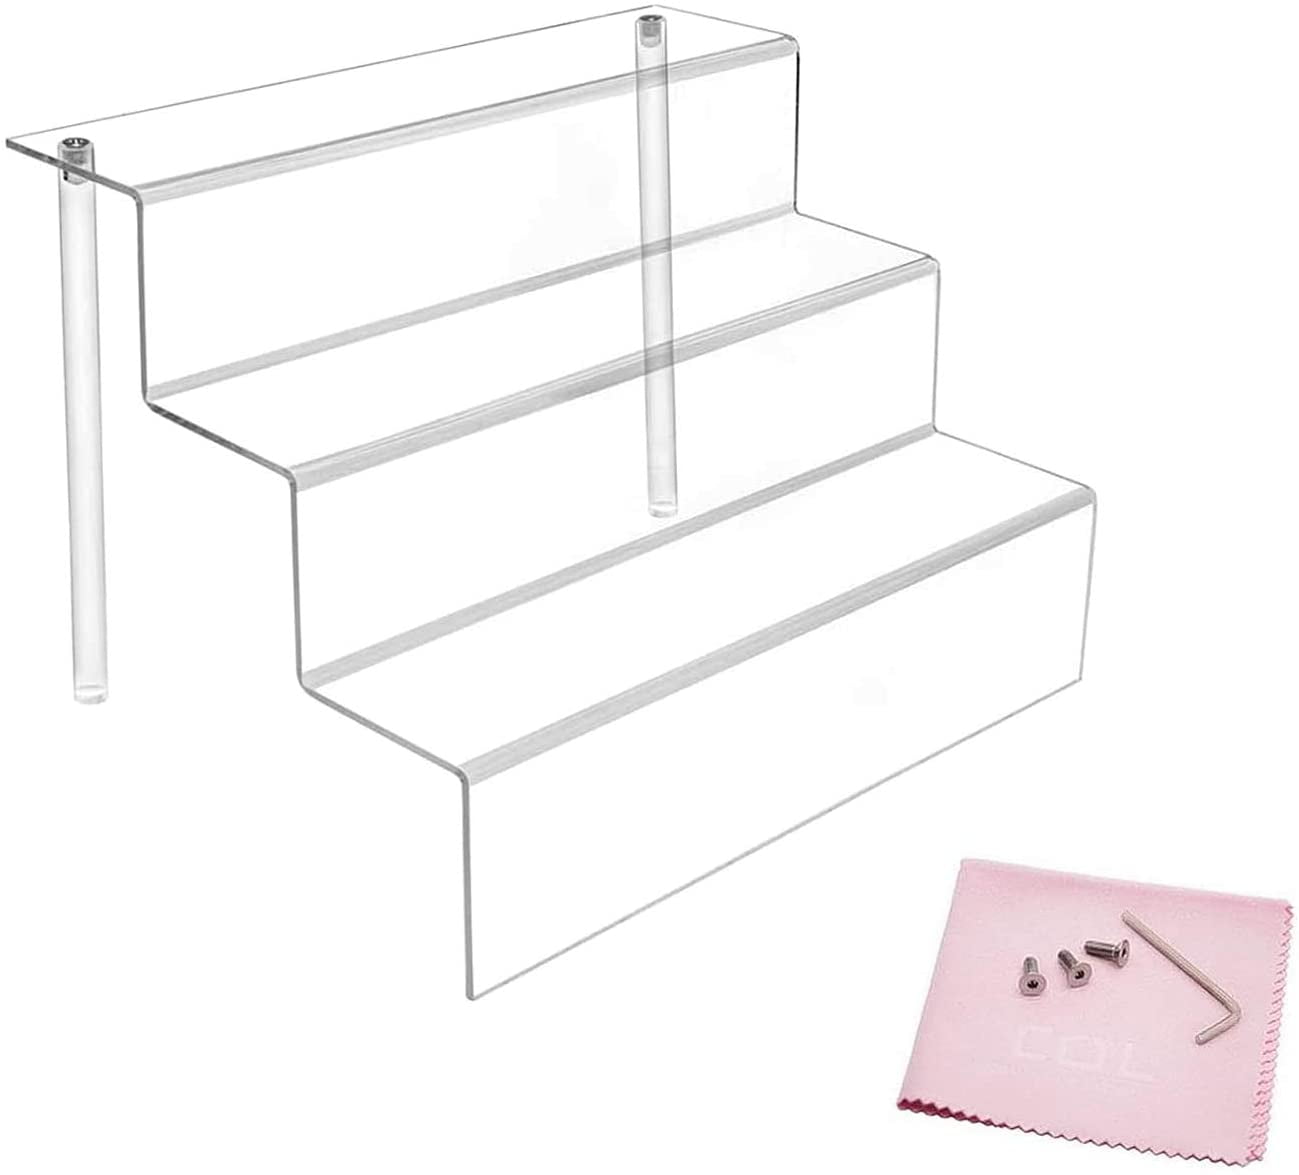 Shelf Stoppers 60mm exposed Shelf Risers Acrylic Risers 